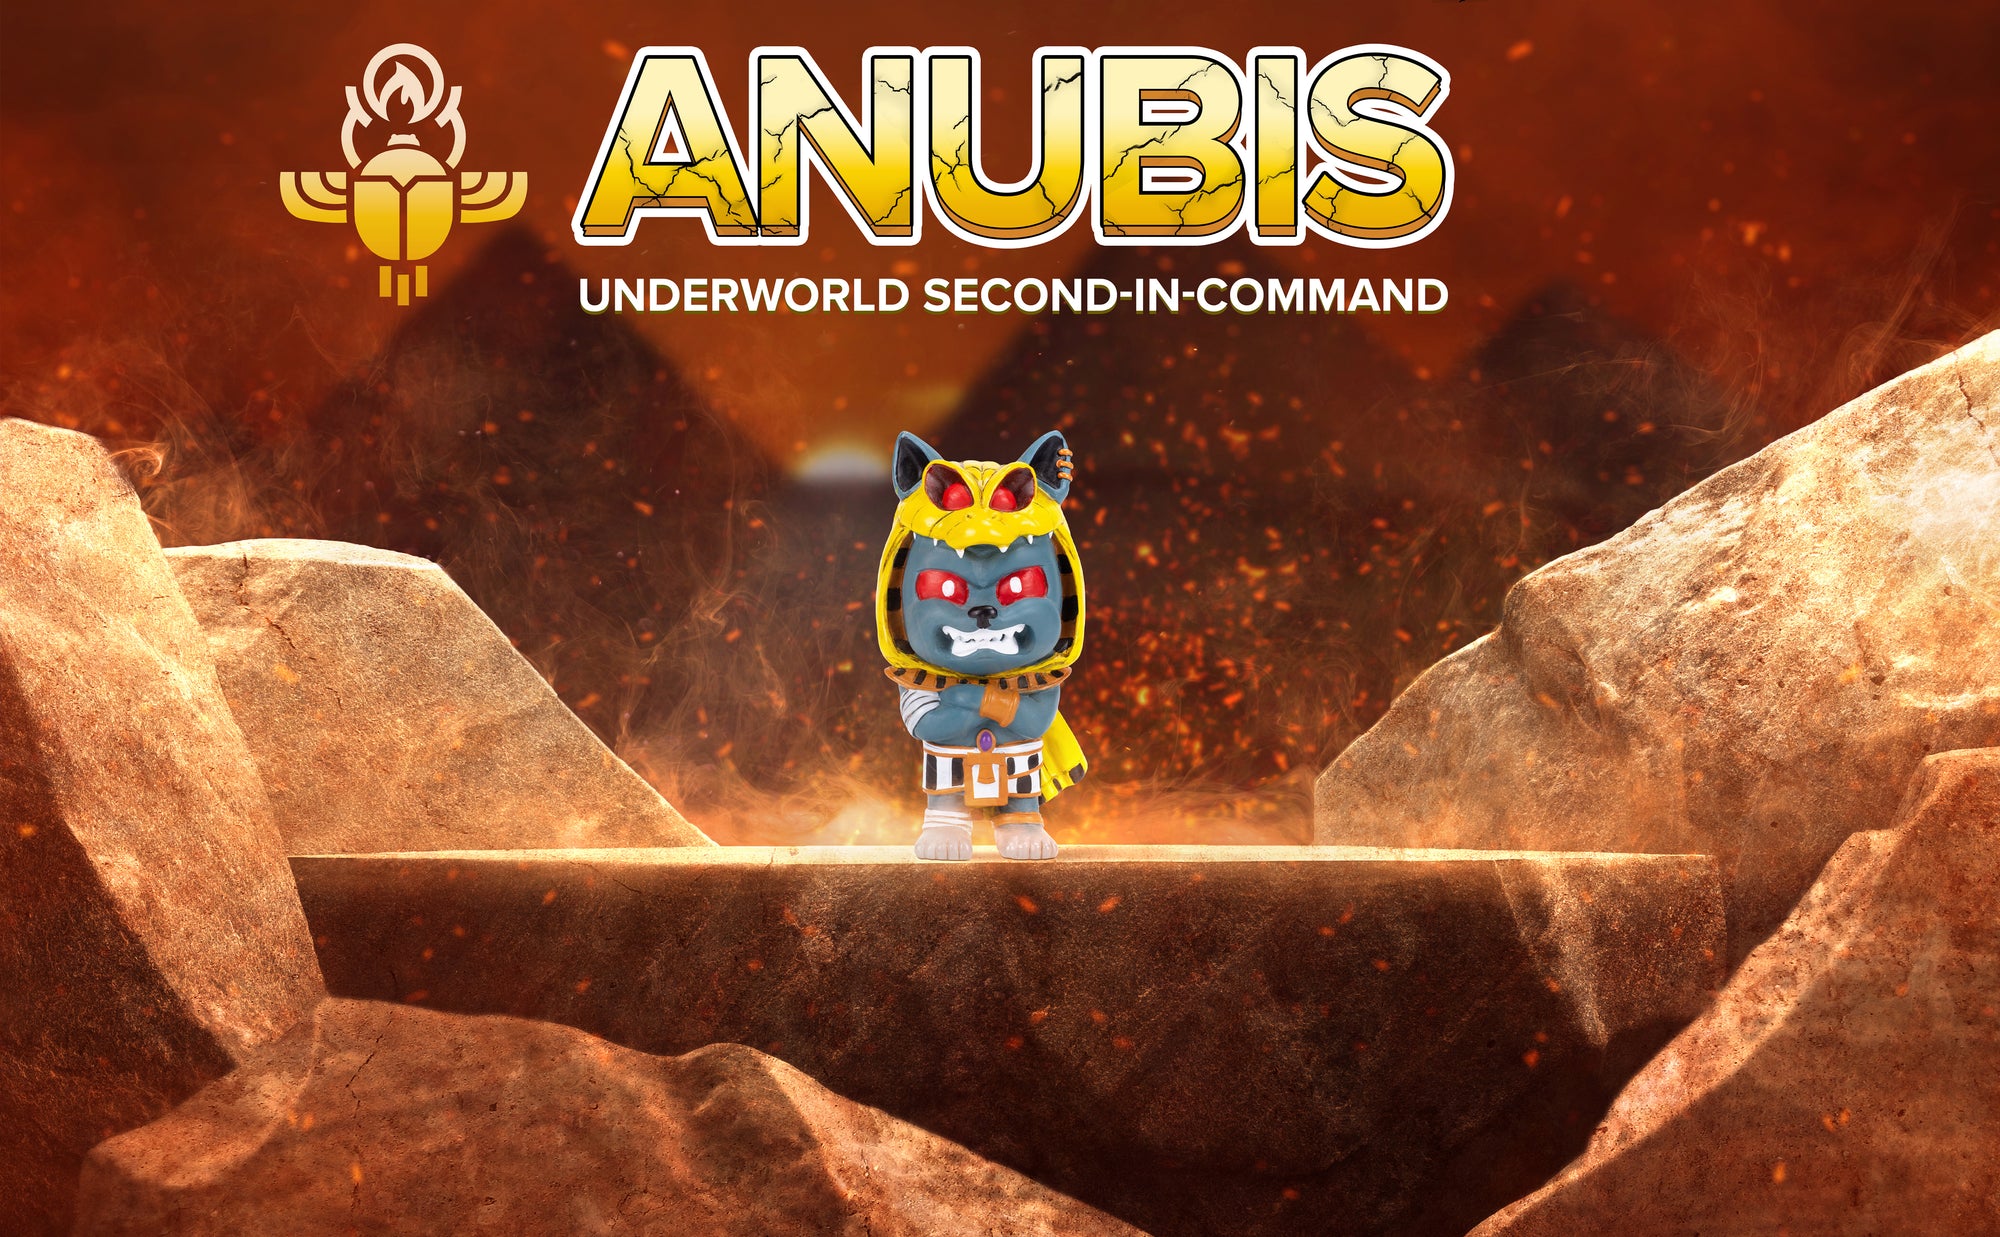 Anubis Smashcraft collectible in realistic Underworld with pyramids. Text "Anubis, Underworld Second-in-Command" and Anubis' beetle logo